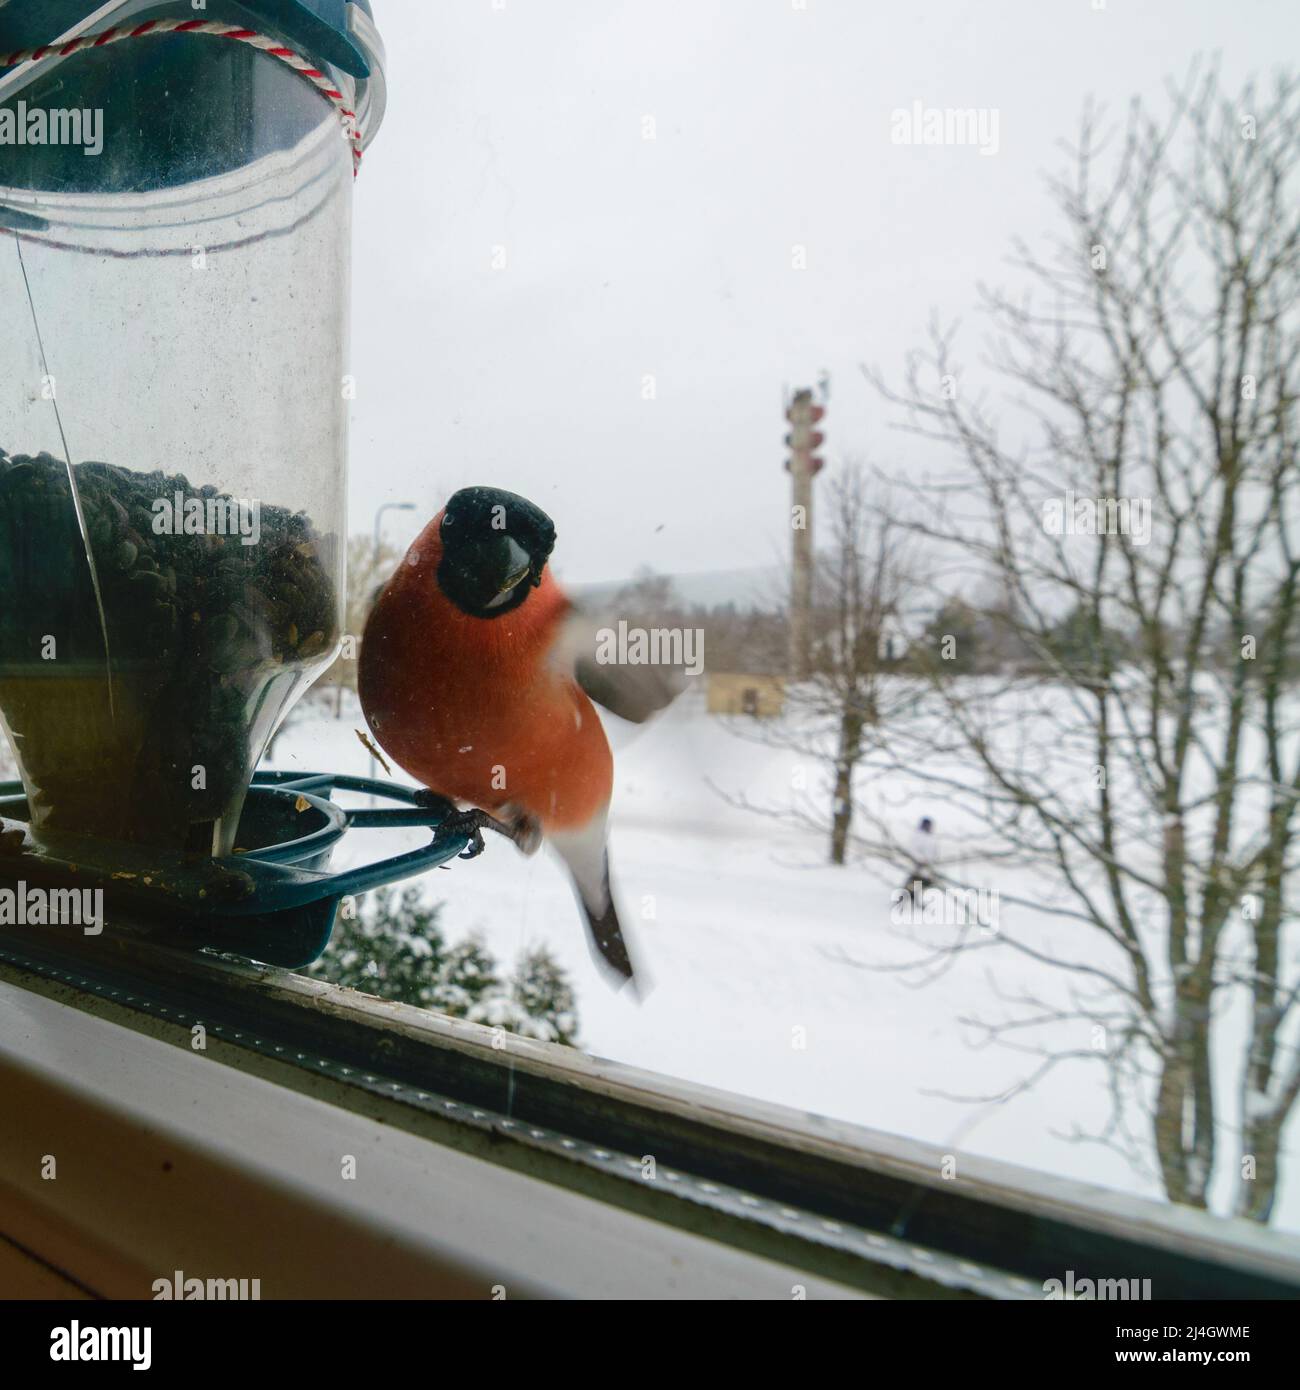 Bird eats sunflower seeds, feeds by the window, helps birds find food in winter, photographed through the window glass, blurred image Stock Photo